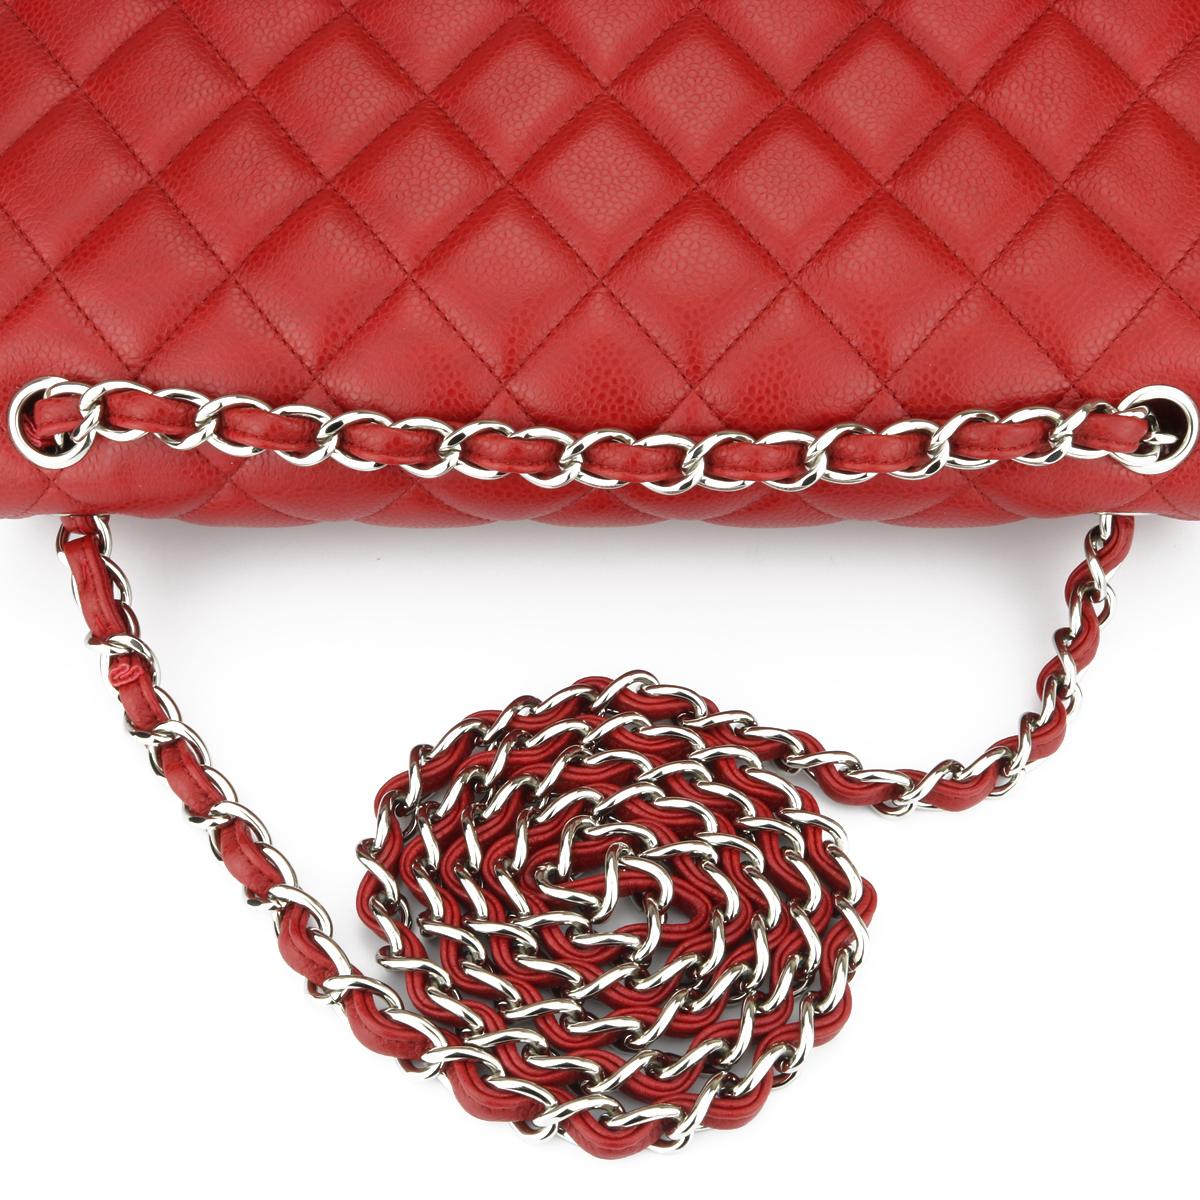 CHANEL Double Flap Jumbo Bag Red Caviar with Silver Hardware 2010 5